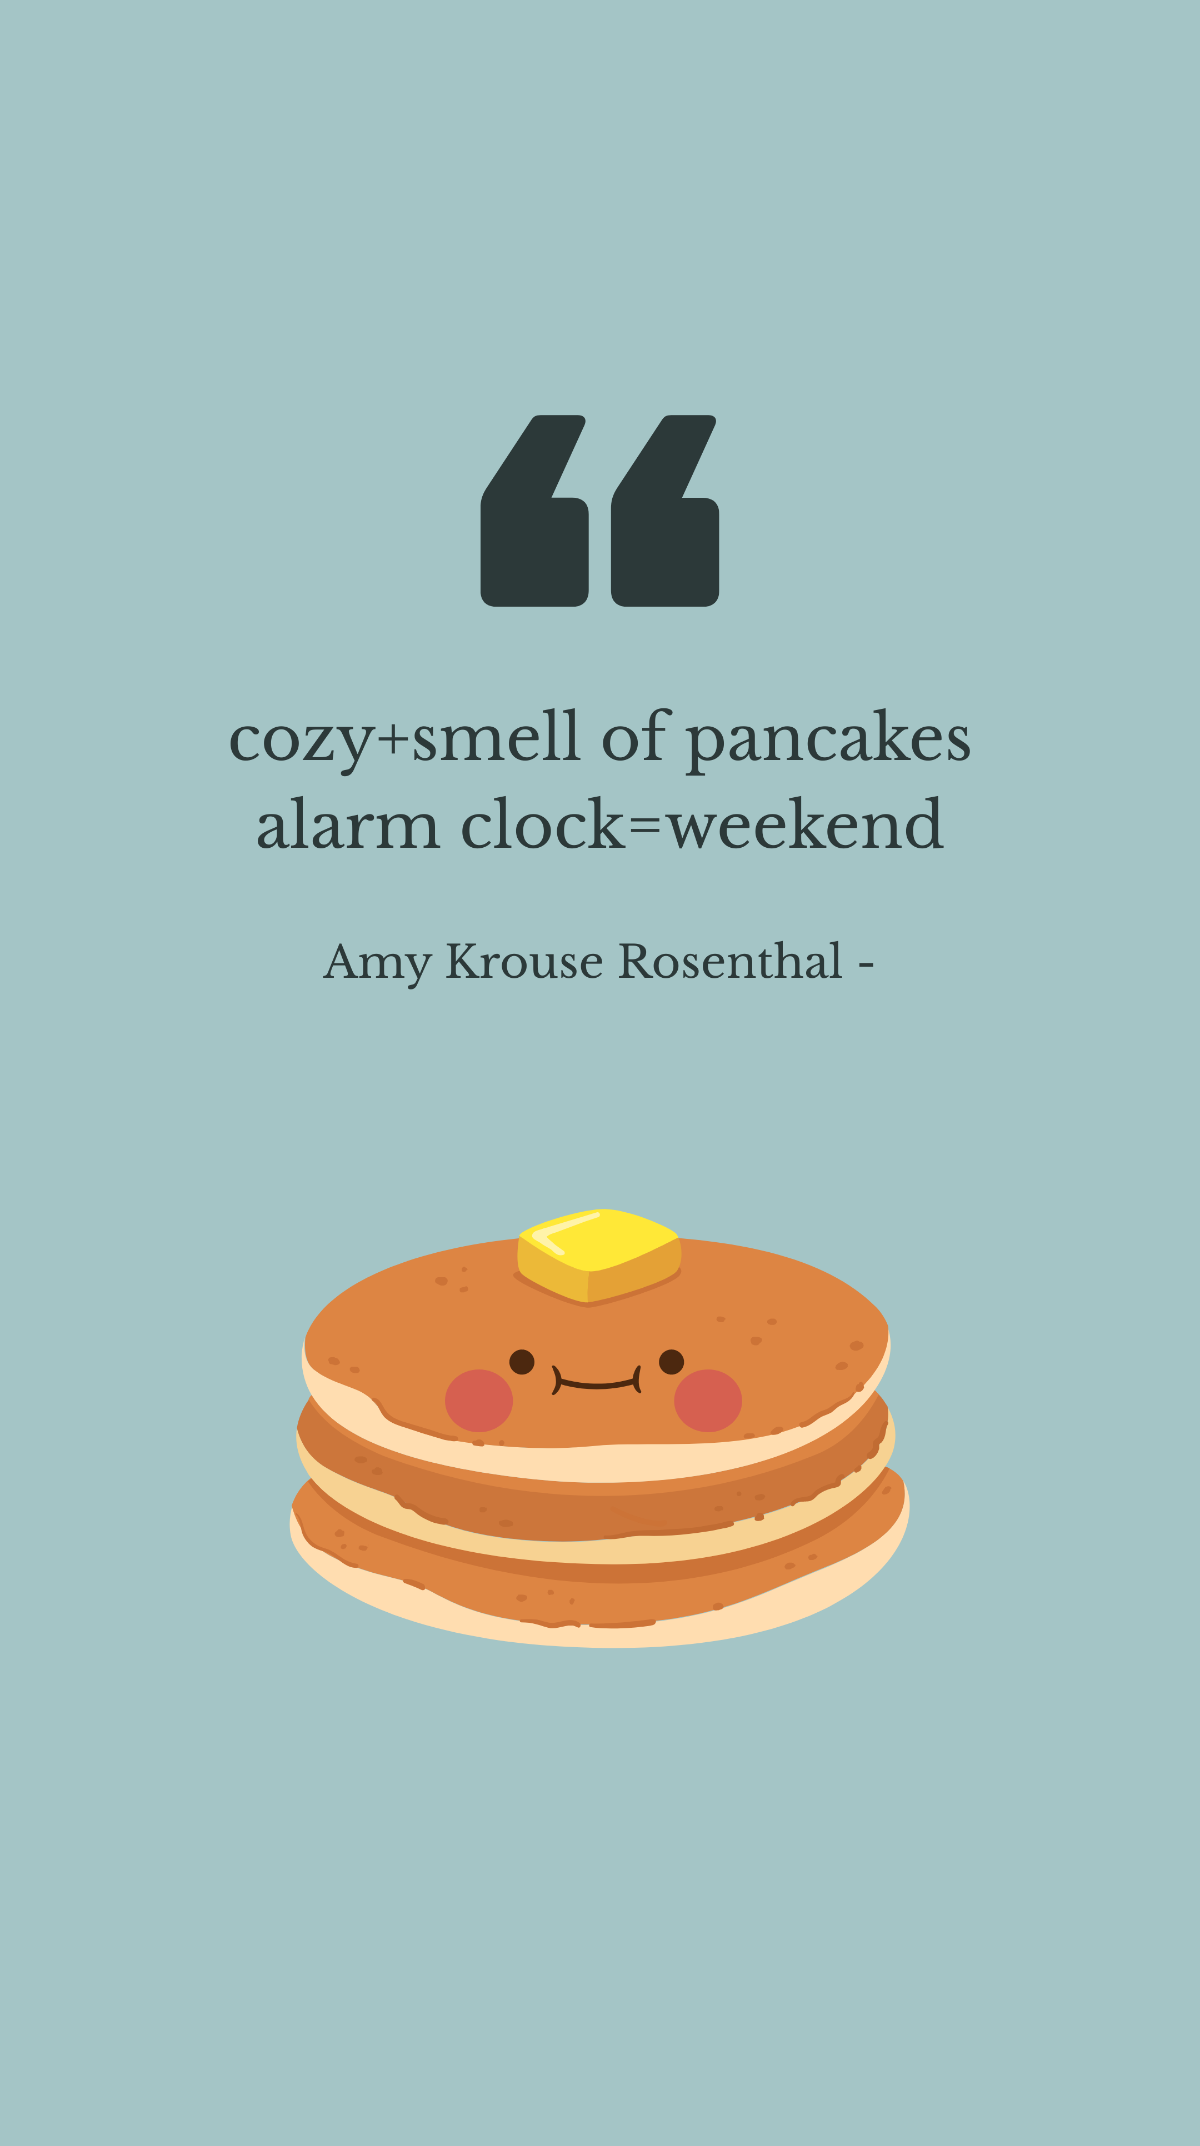 Amy Krouse Rosenthal - cozy+smell of pancakes alarm clock=weekend